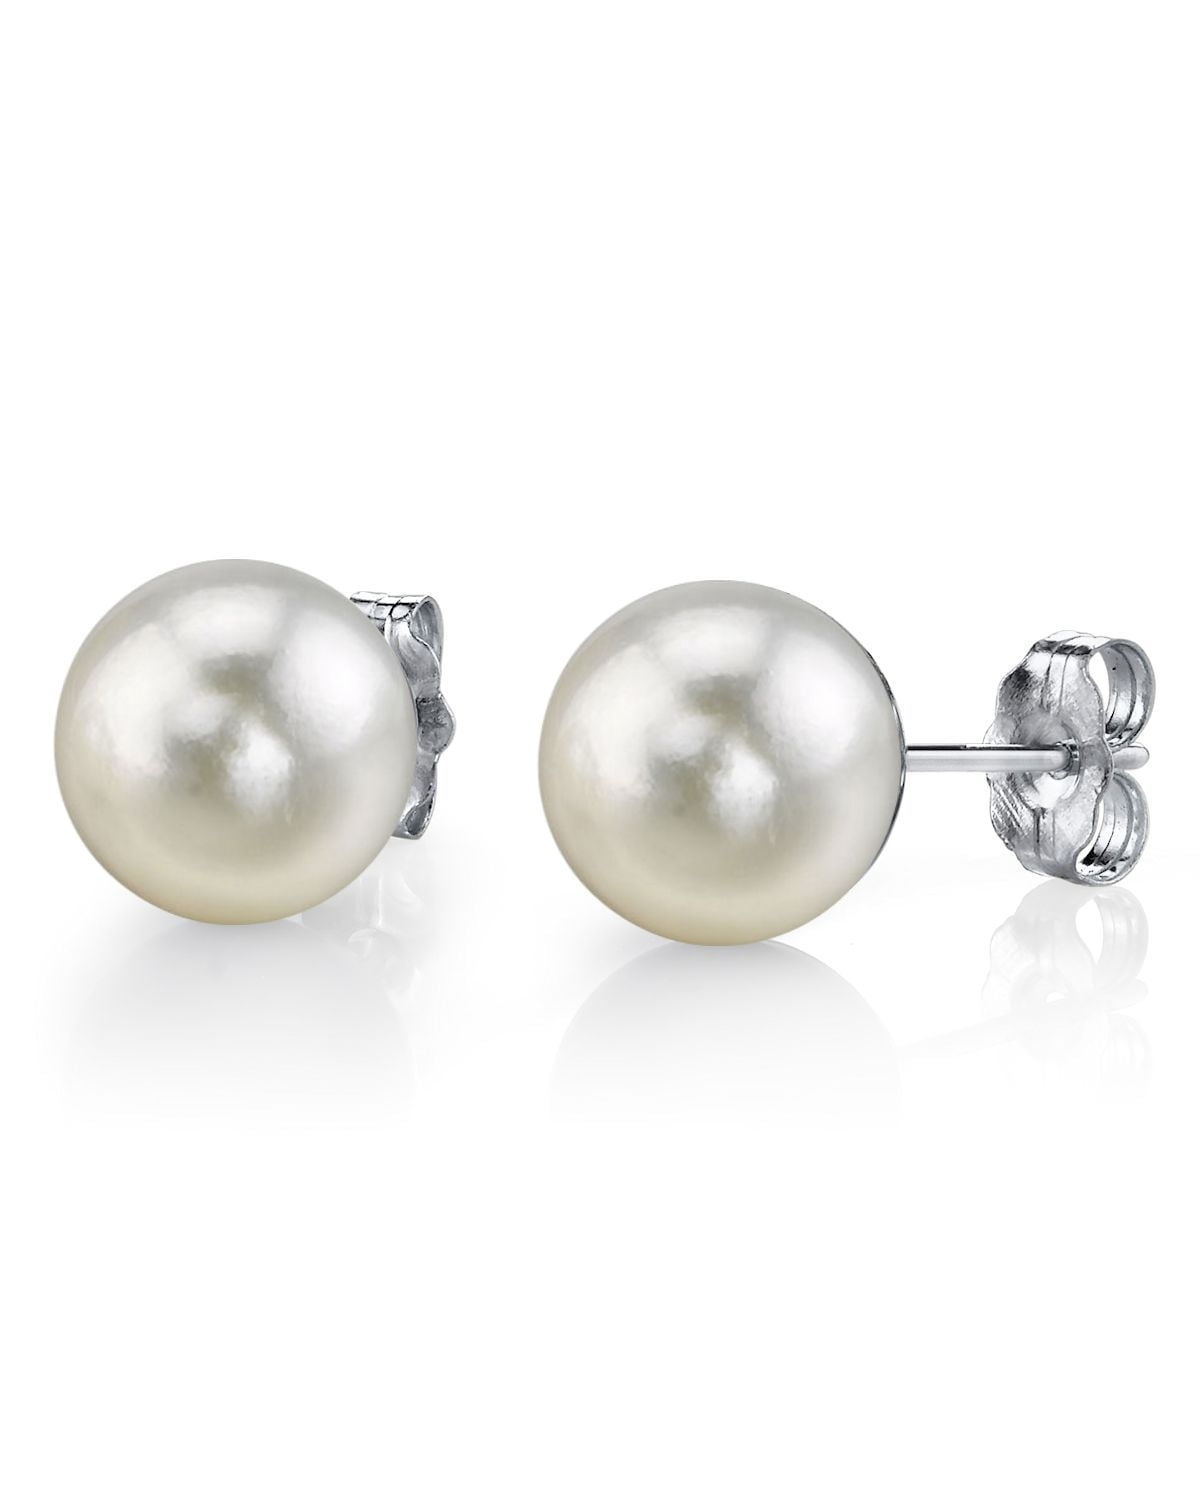 THE PEARL SOURCE Freshwater Cultured Round Pearl Earrings for Women with 14K Gold in AAAA Quality 